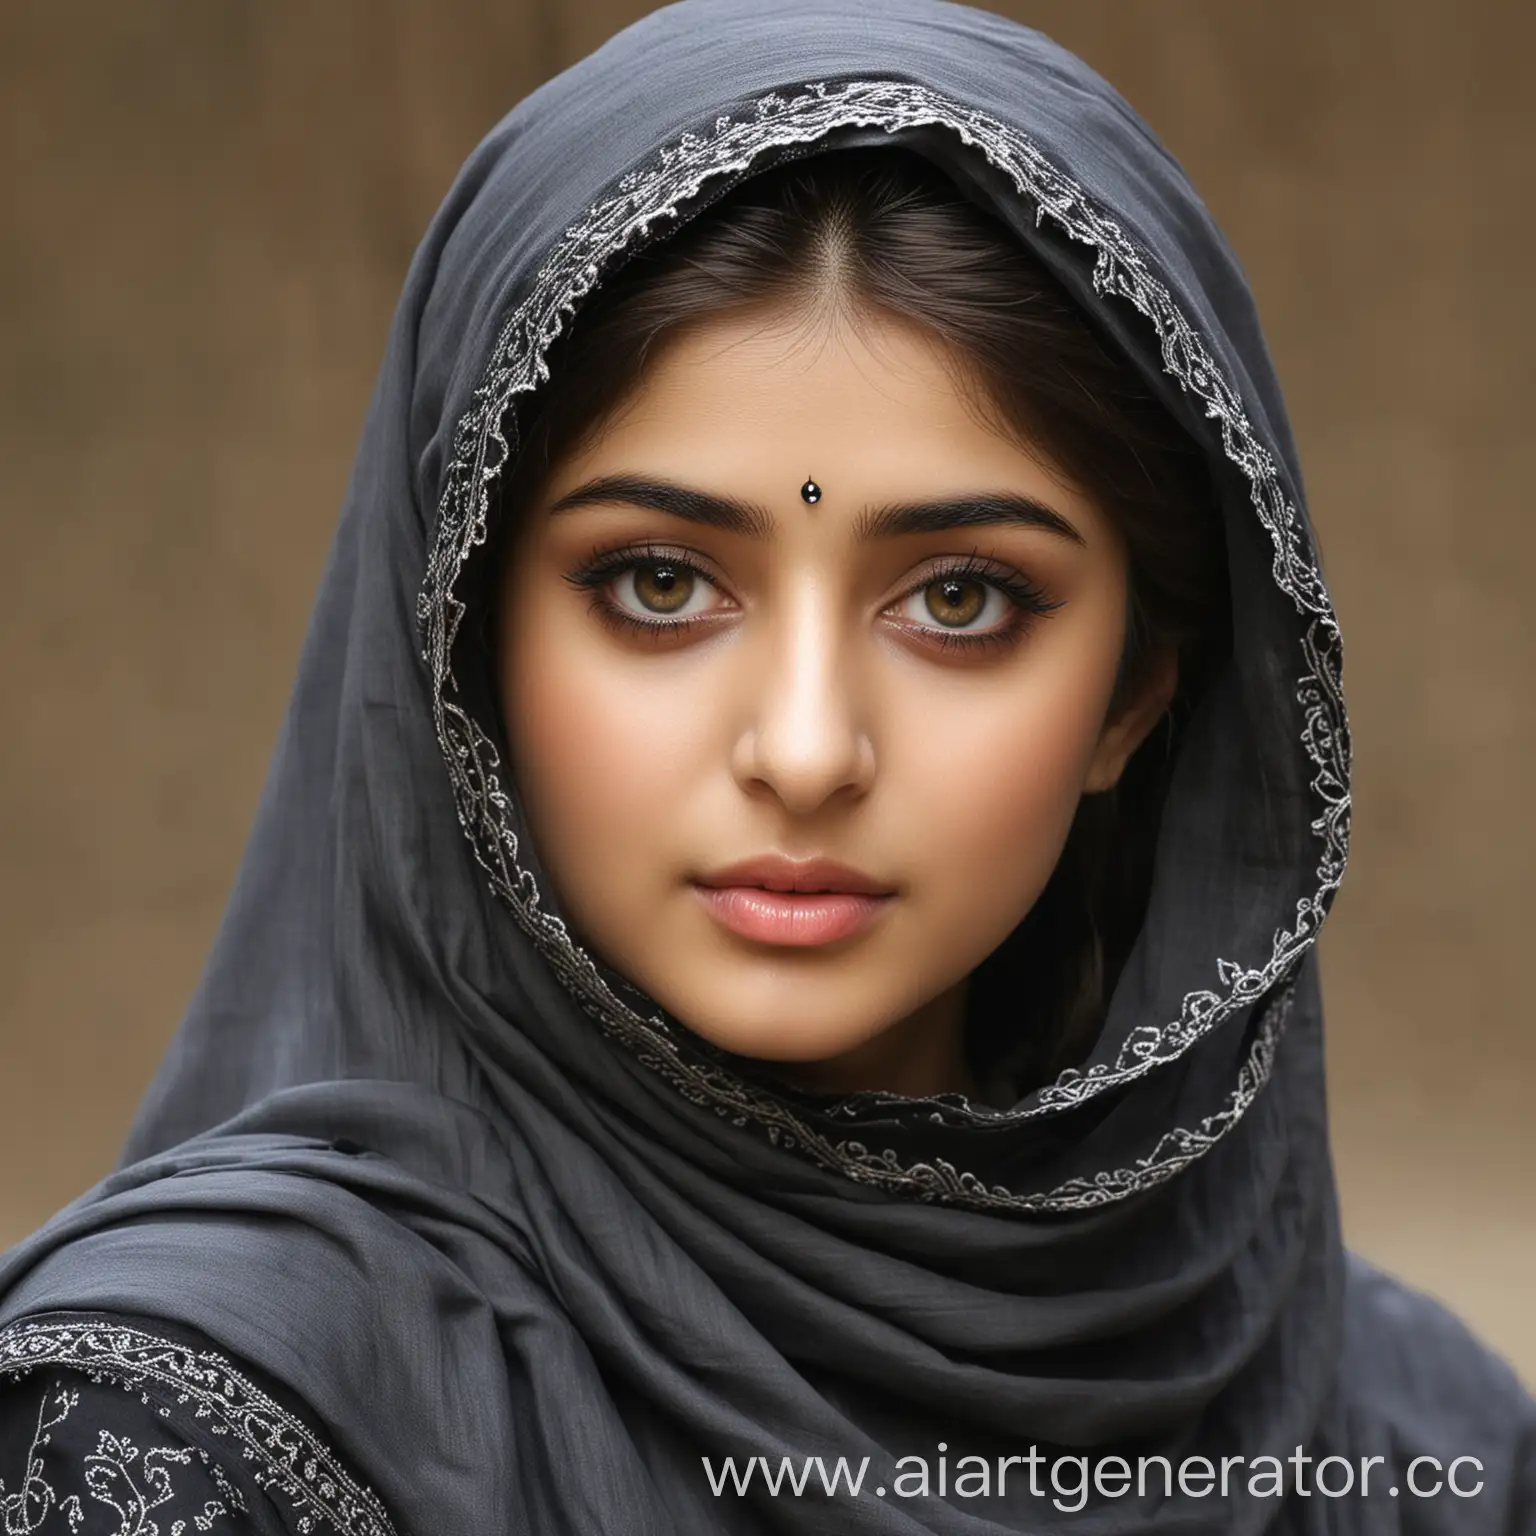 Young-Pakistani-Muslim-Actress-Sajal-Ali-in-Traditional-Attire-with-Niqab-and-Abaya